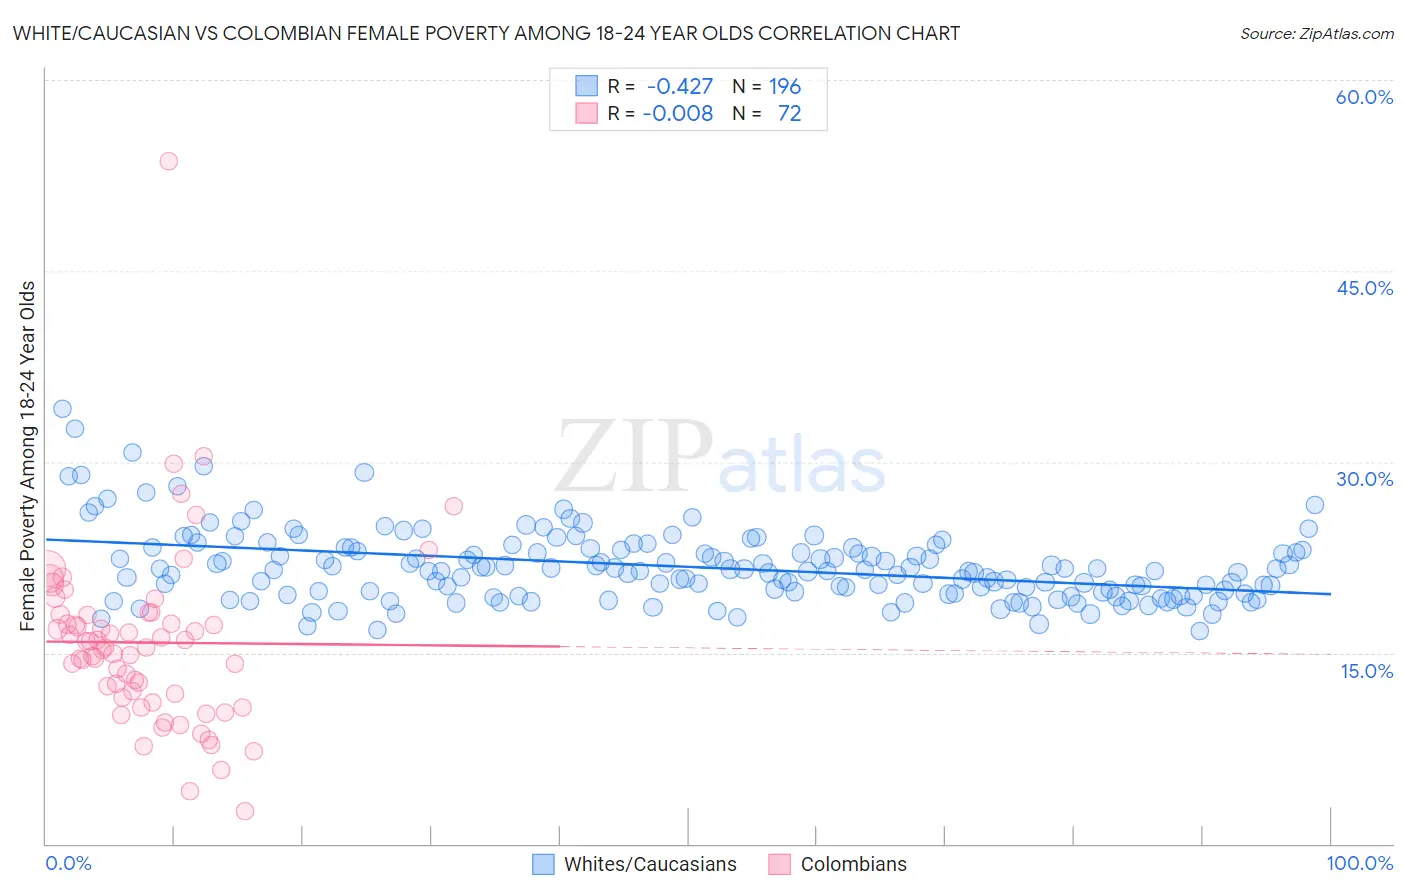 White/Caucasian vs Colombian Female Poverty Among 18-24 Year Olds